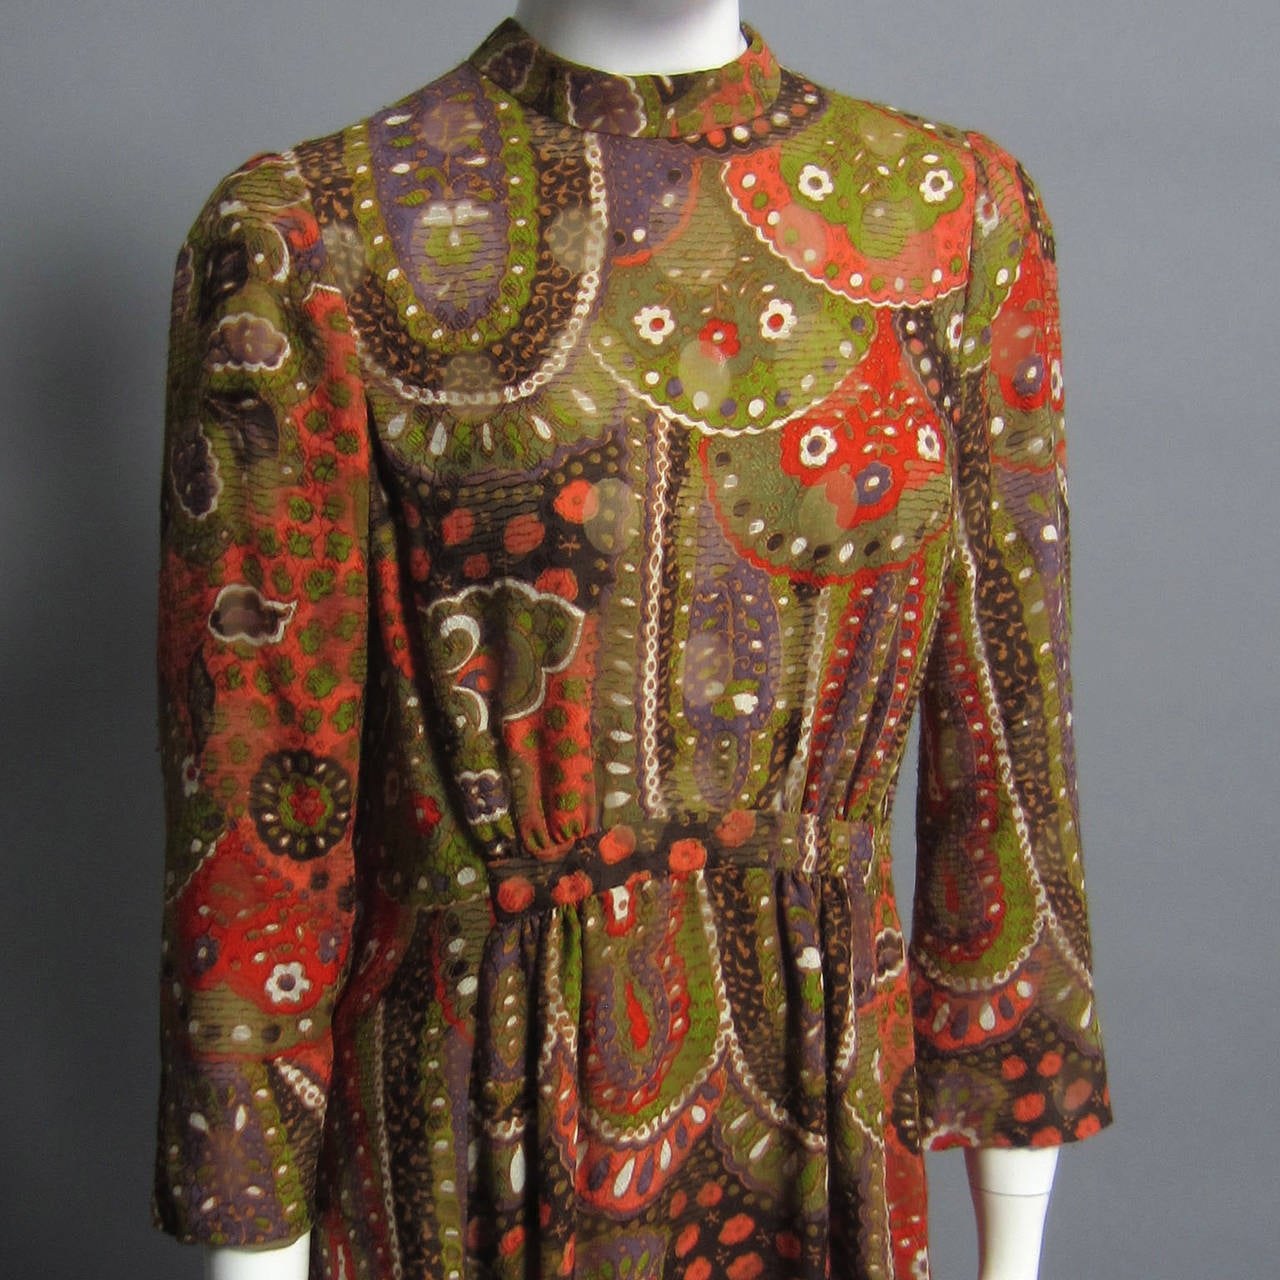 Like all PAULINE TRIGERE pieces we come across, this dress is made of exquisite fabric. The rich brown, green and orange tones create a kaleidoscope like paisley print. The bell sleeves and the a line skirt, allow for movement and show the lightness